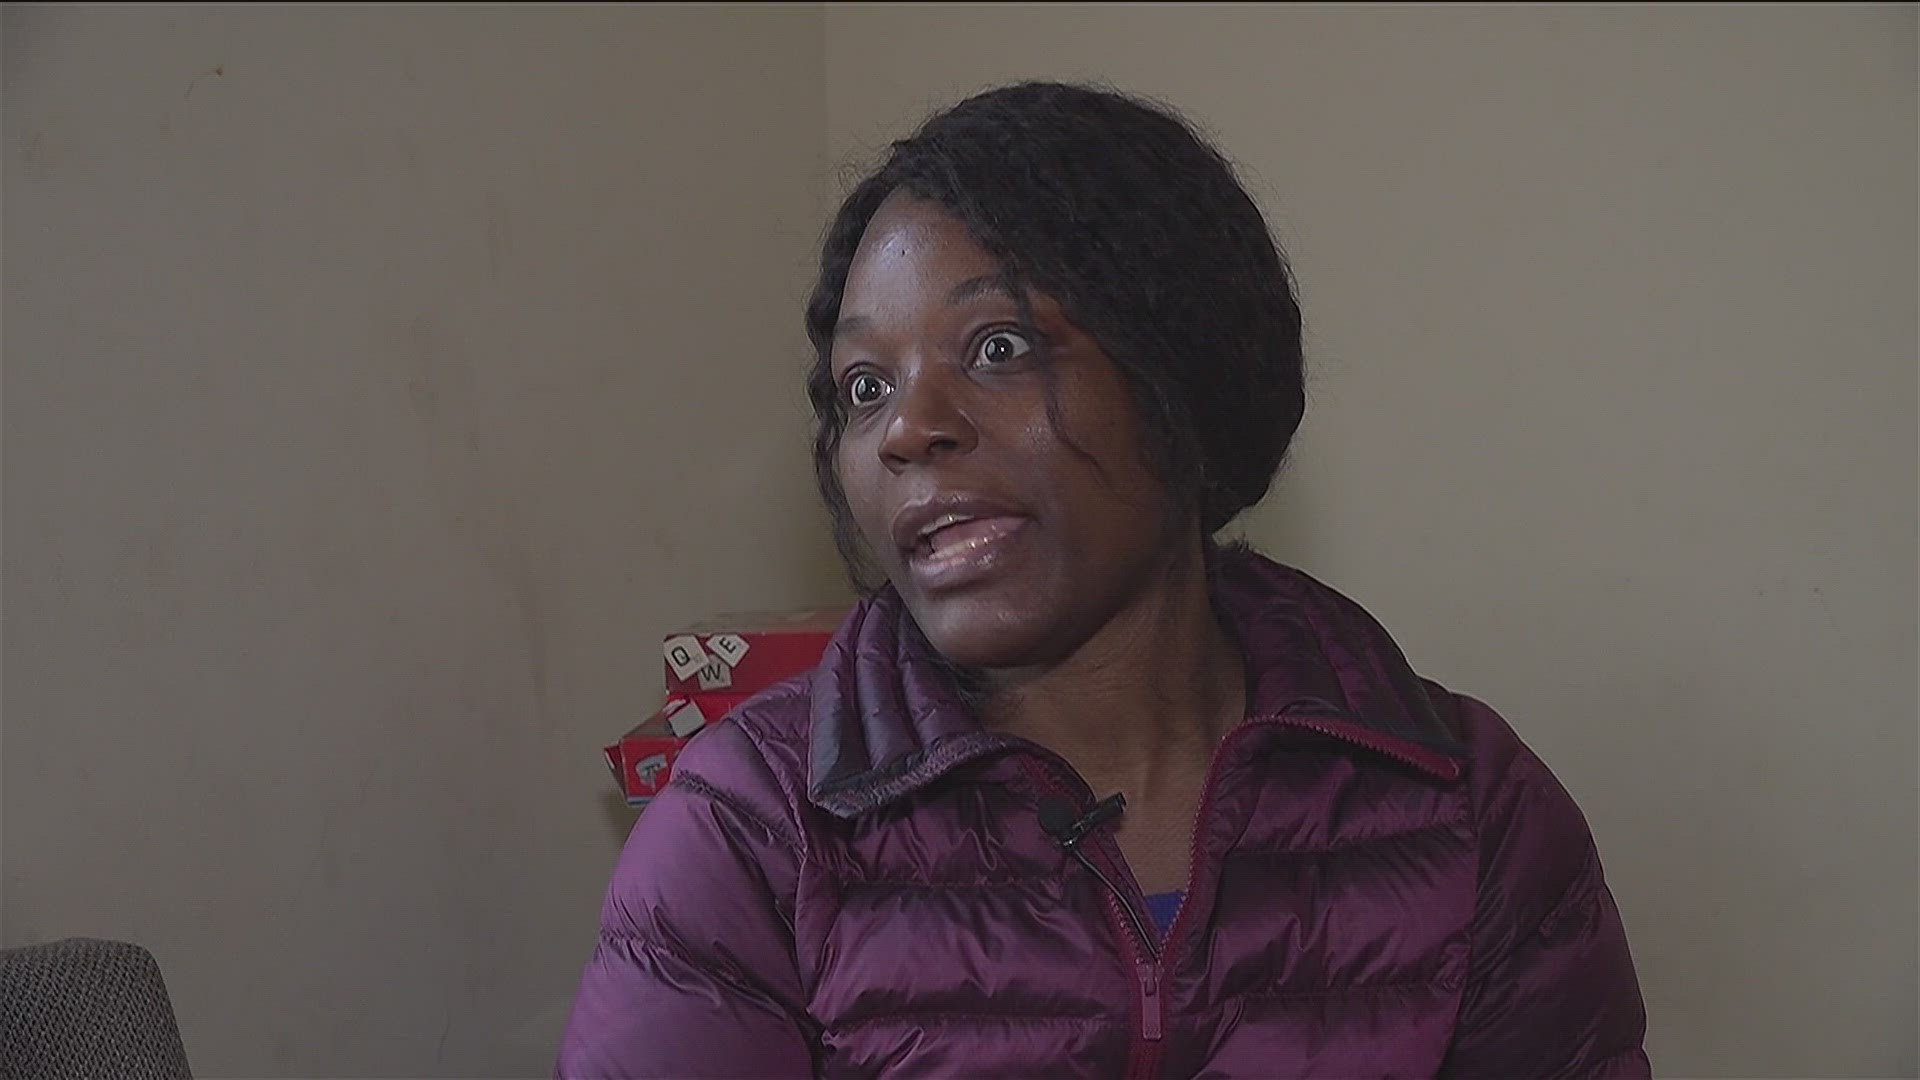 She says an eviction prevention program would keep people from reaching their lowest lows.